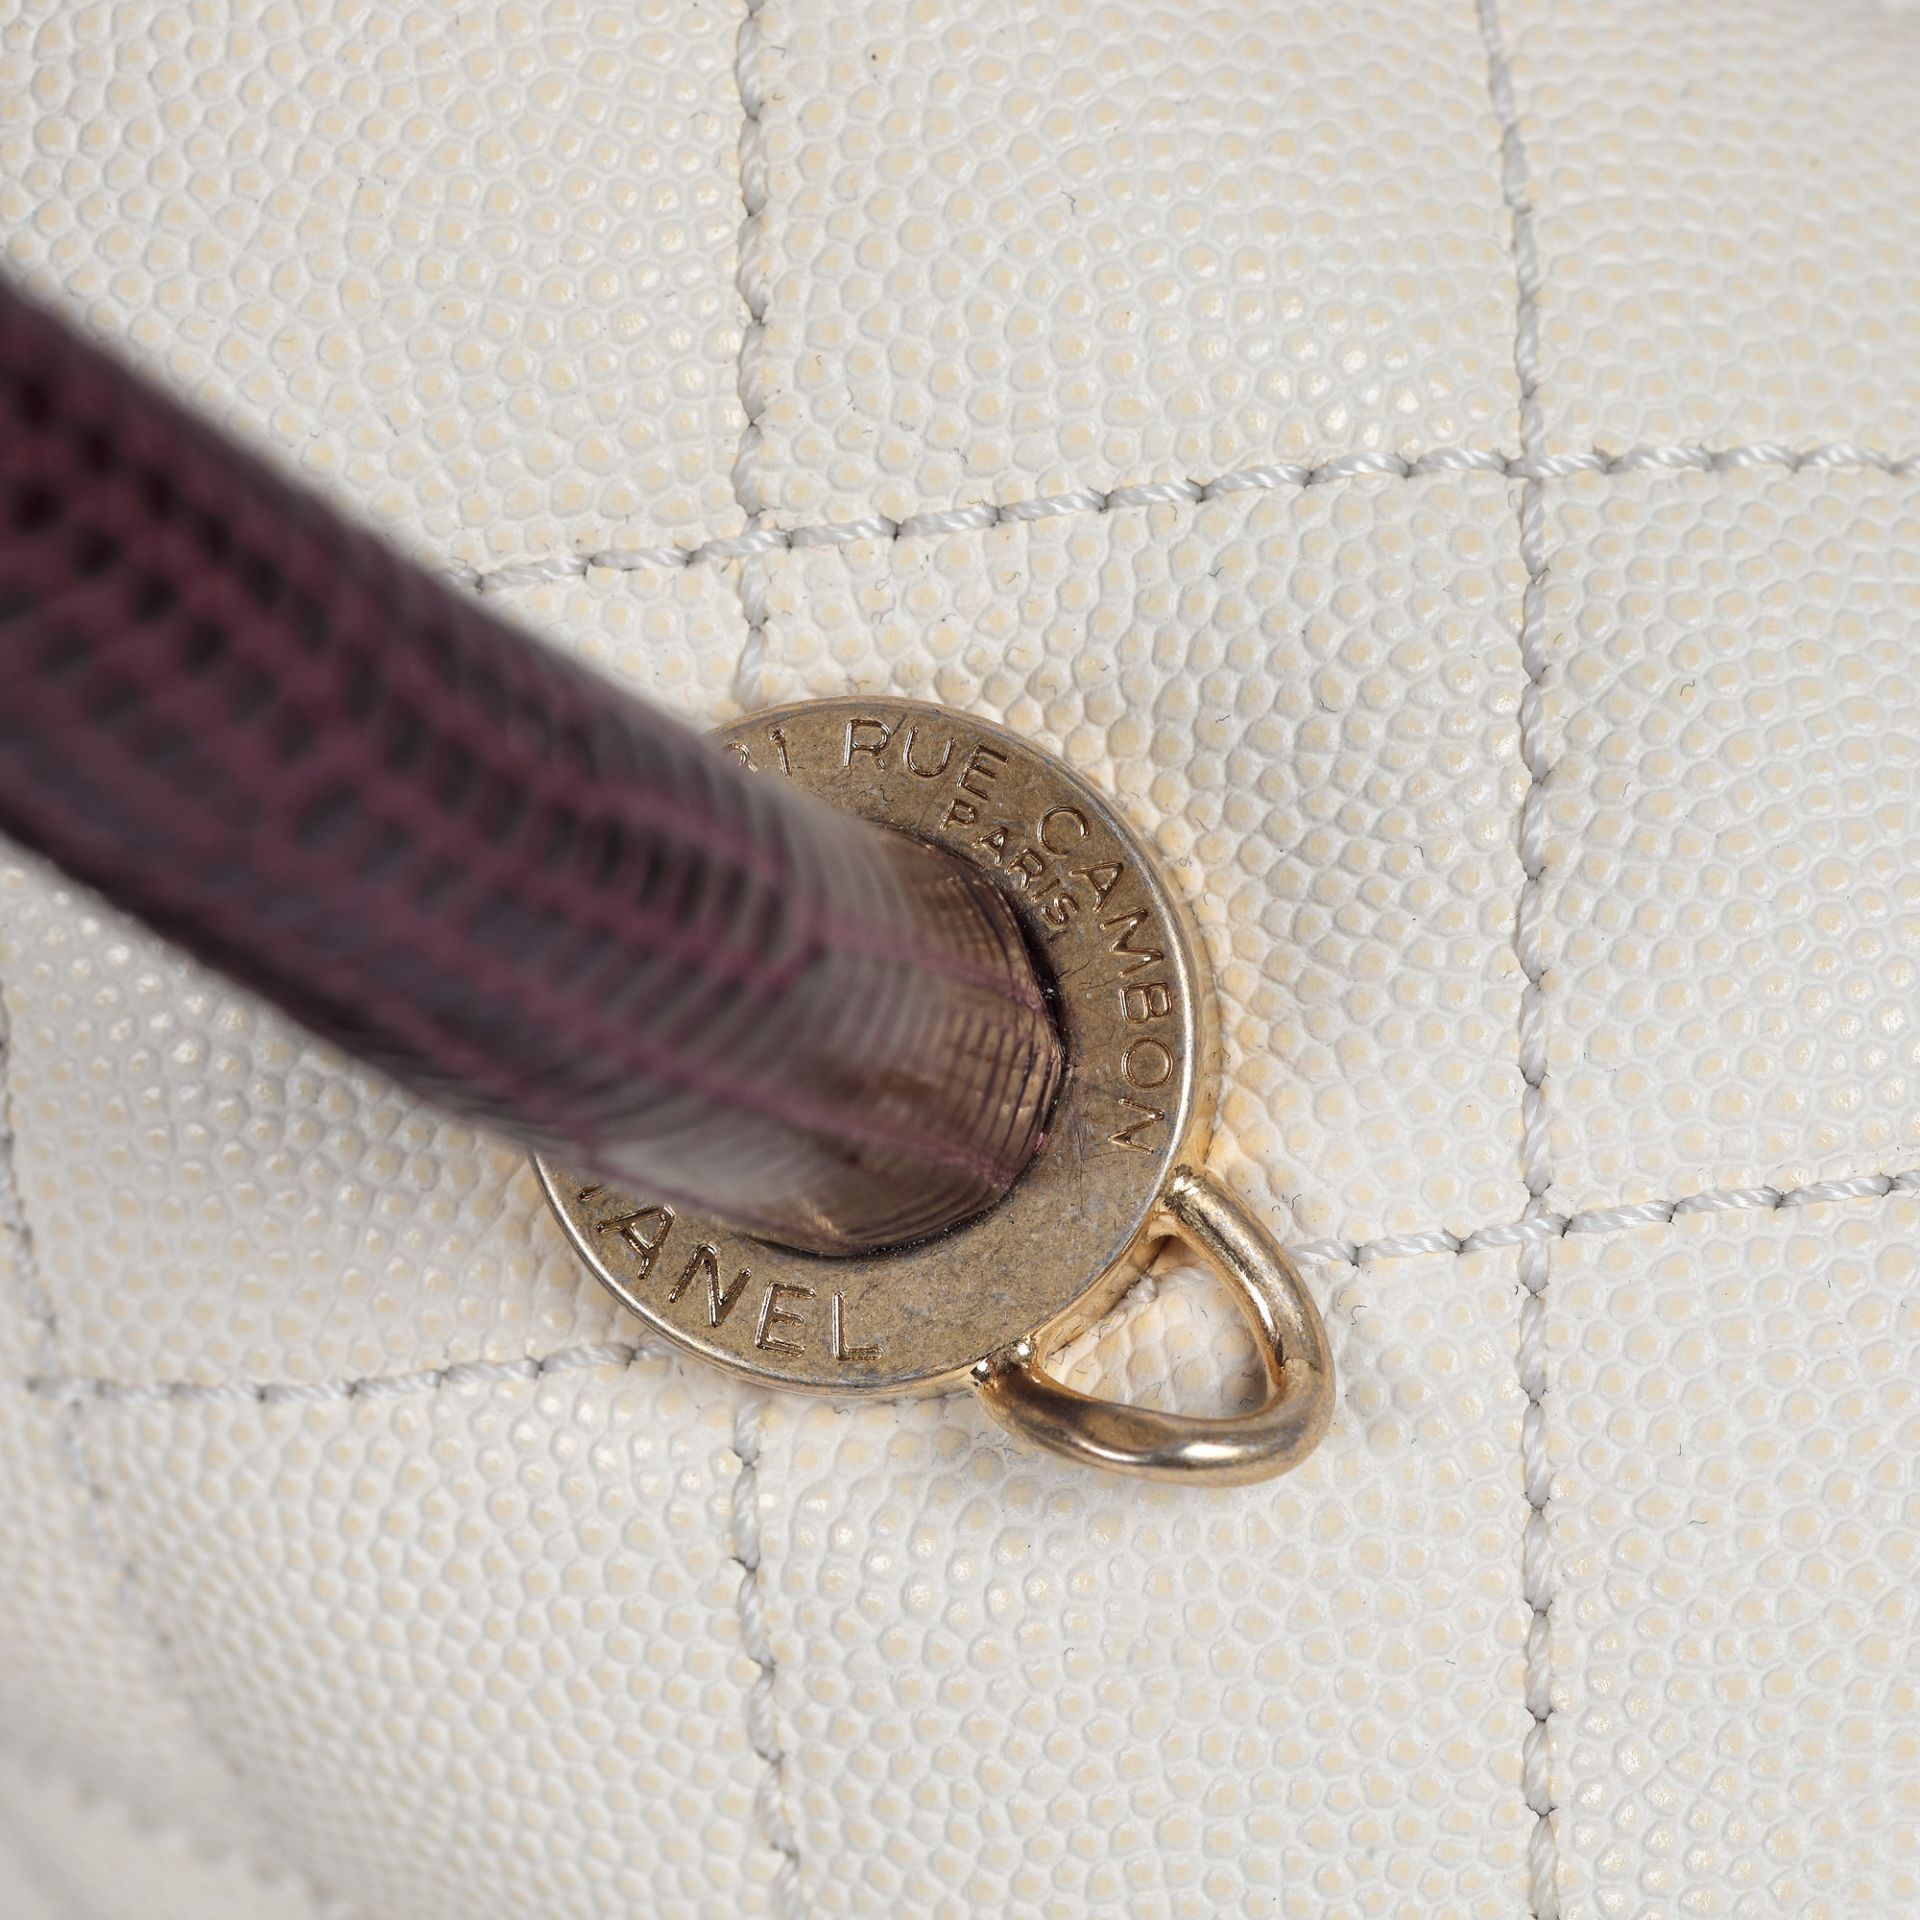 "Coco Handle Bag" - Chanel bag, quilted leather, white, lizard leather handle, burgundy - Image 10 of 11